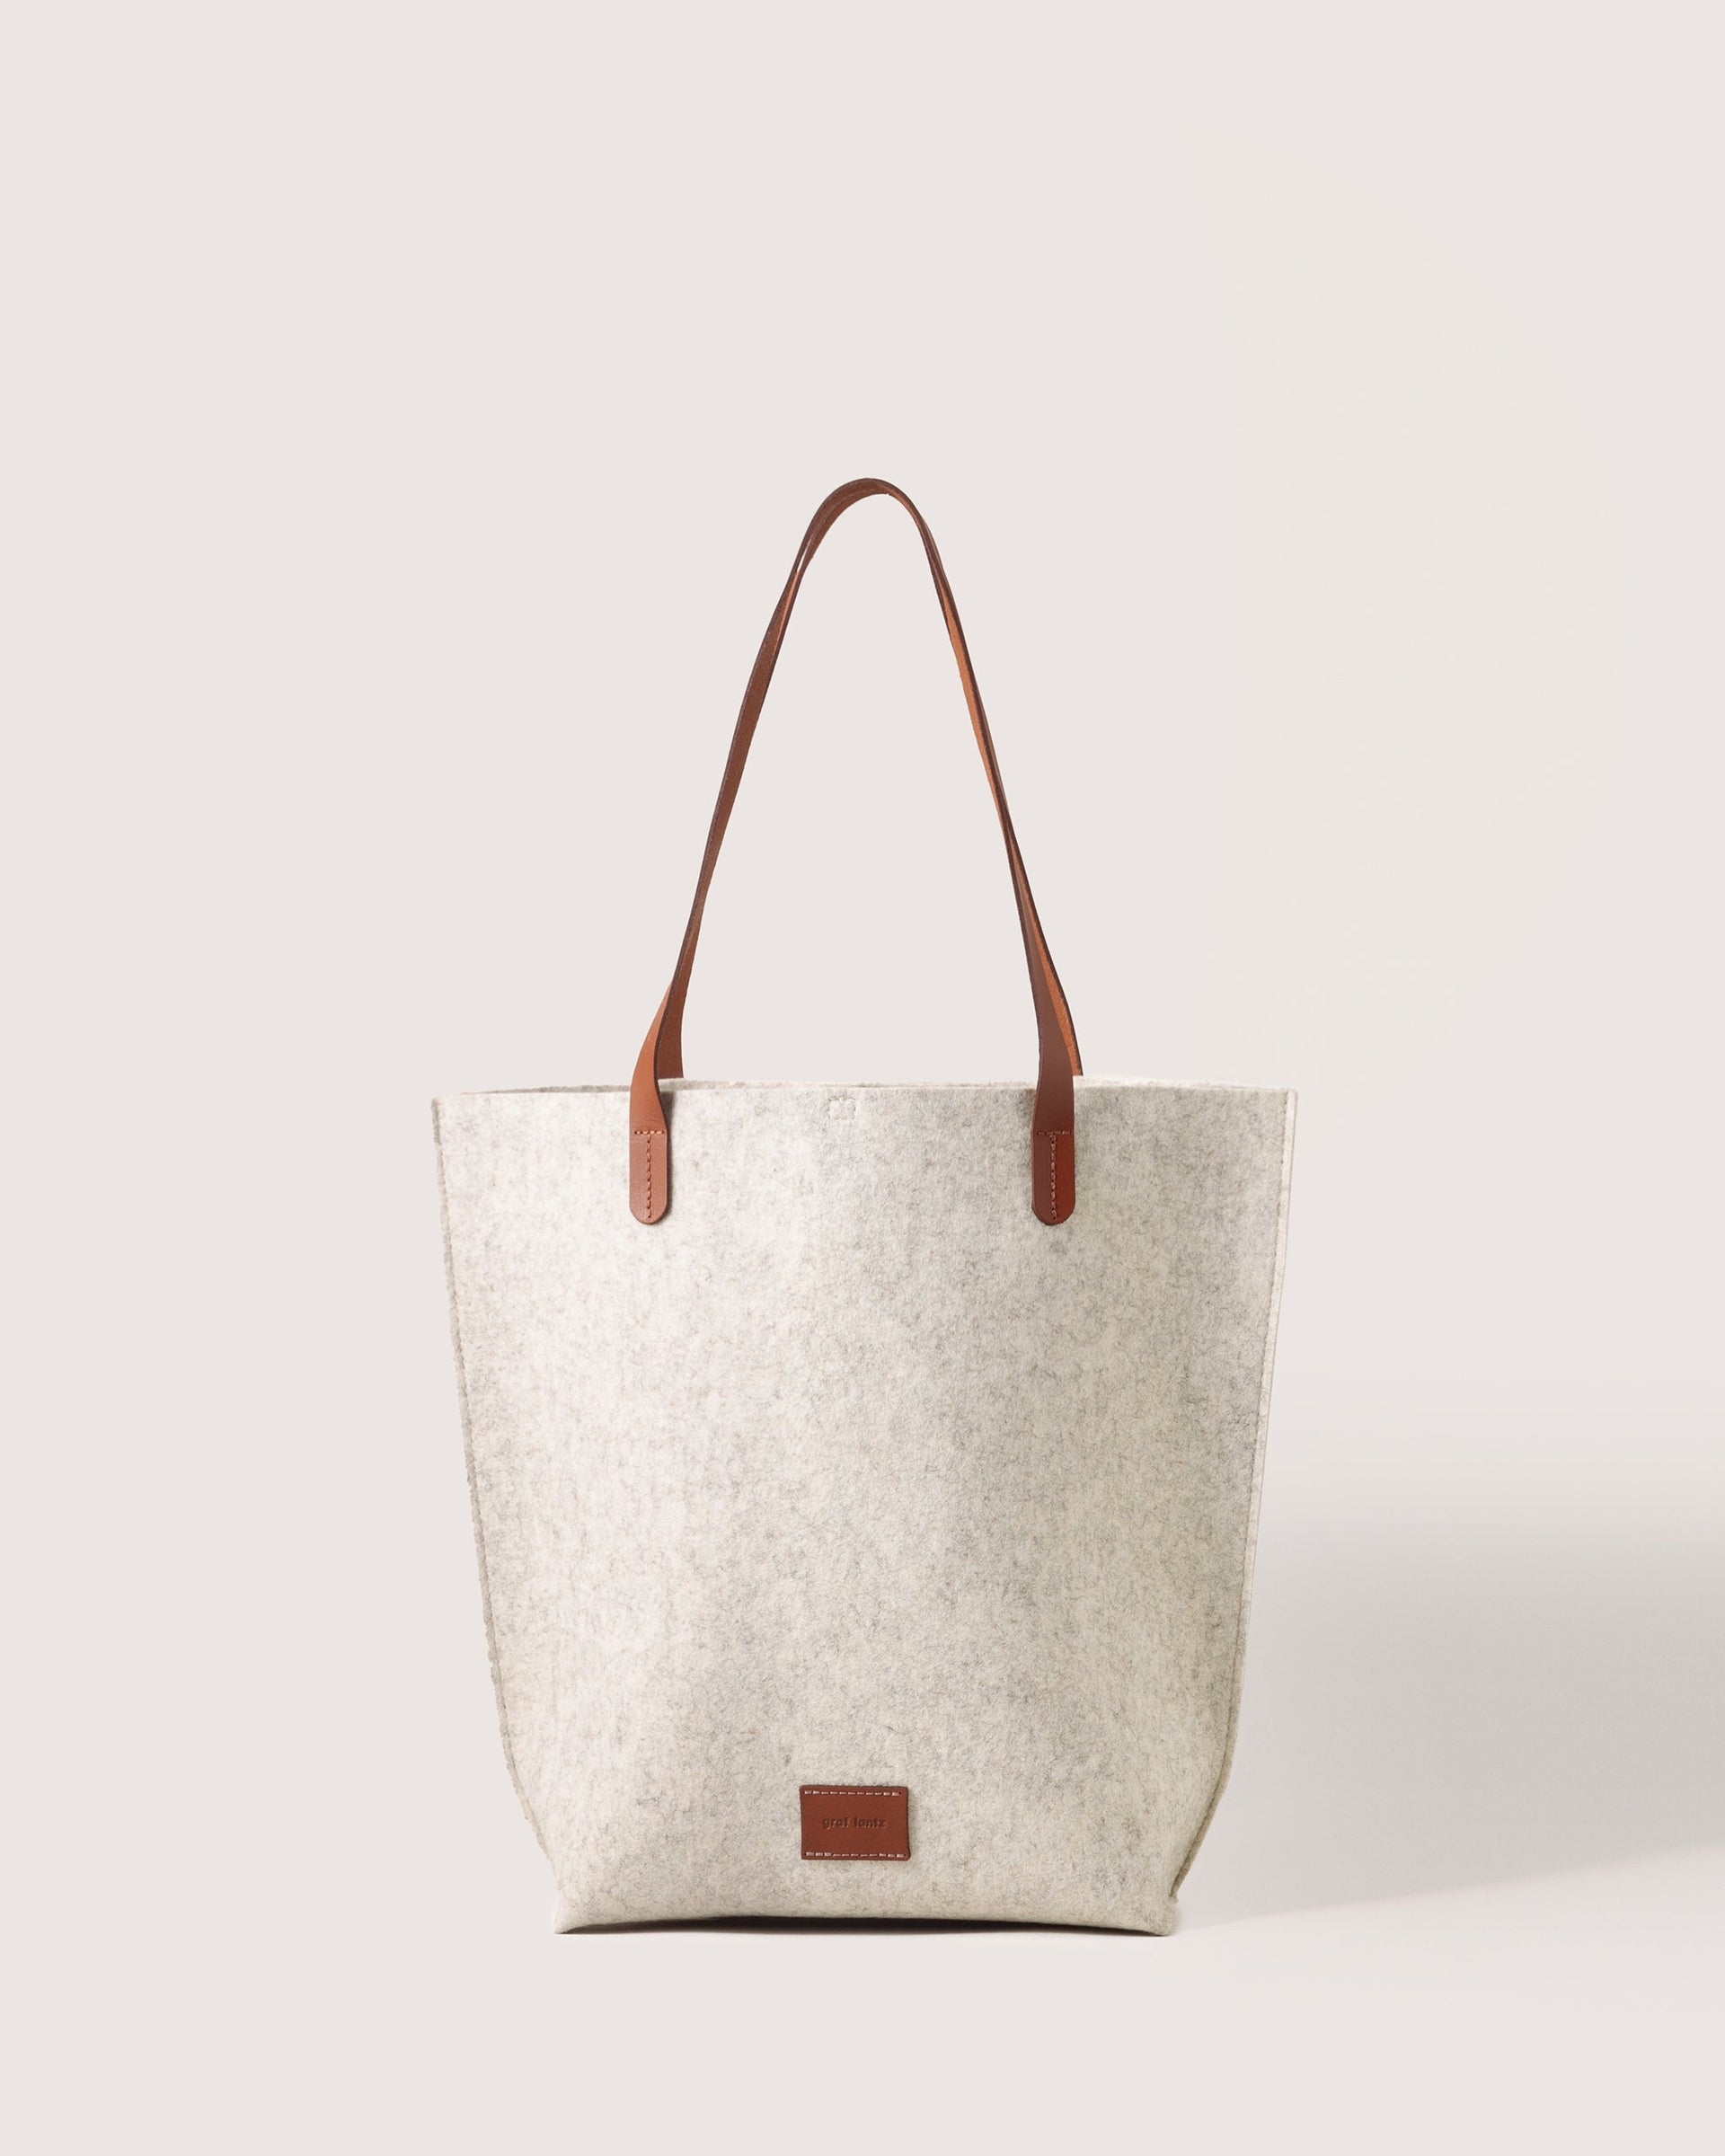 Heather white Hana Merino Wool Tote by Graf Lantz featuring brown leather handles and leather logo tag, front view, white background.